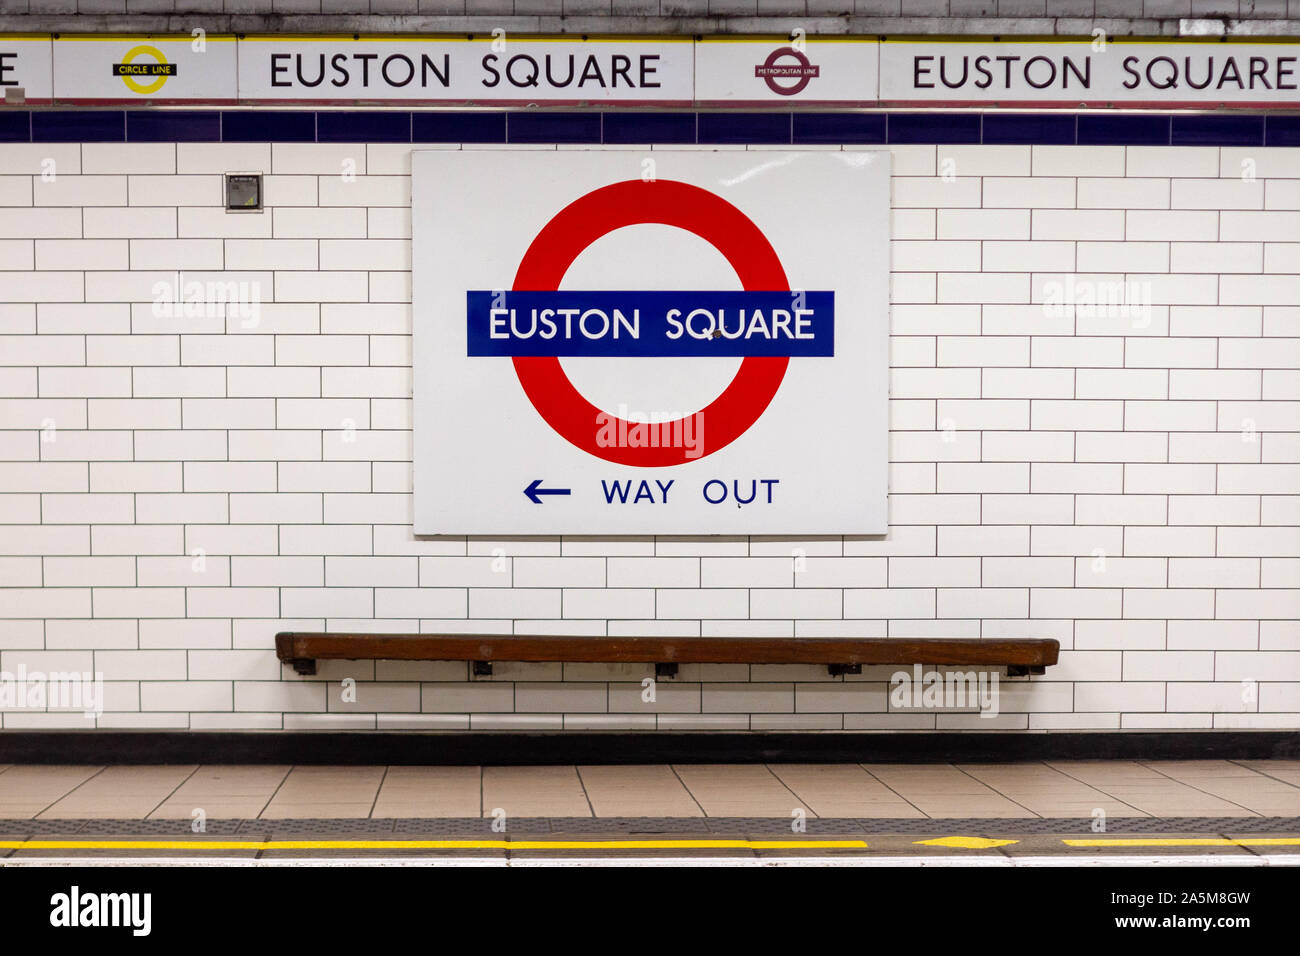 London underground station Euston Square with an empty bench and an arrow pointing to the way out Stock Photo